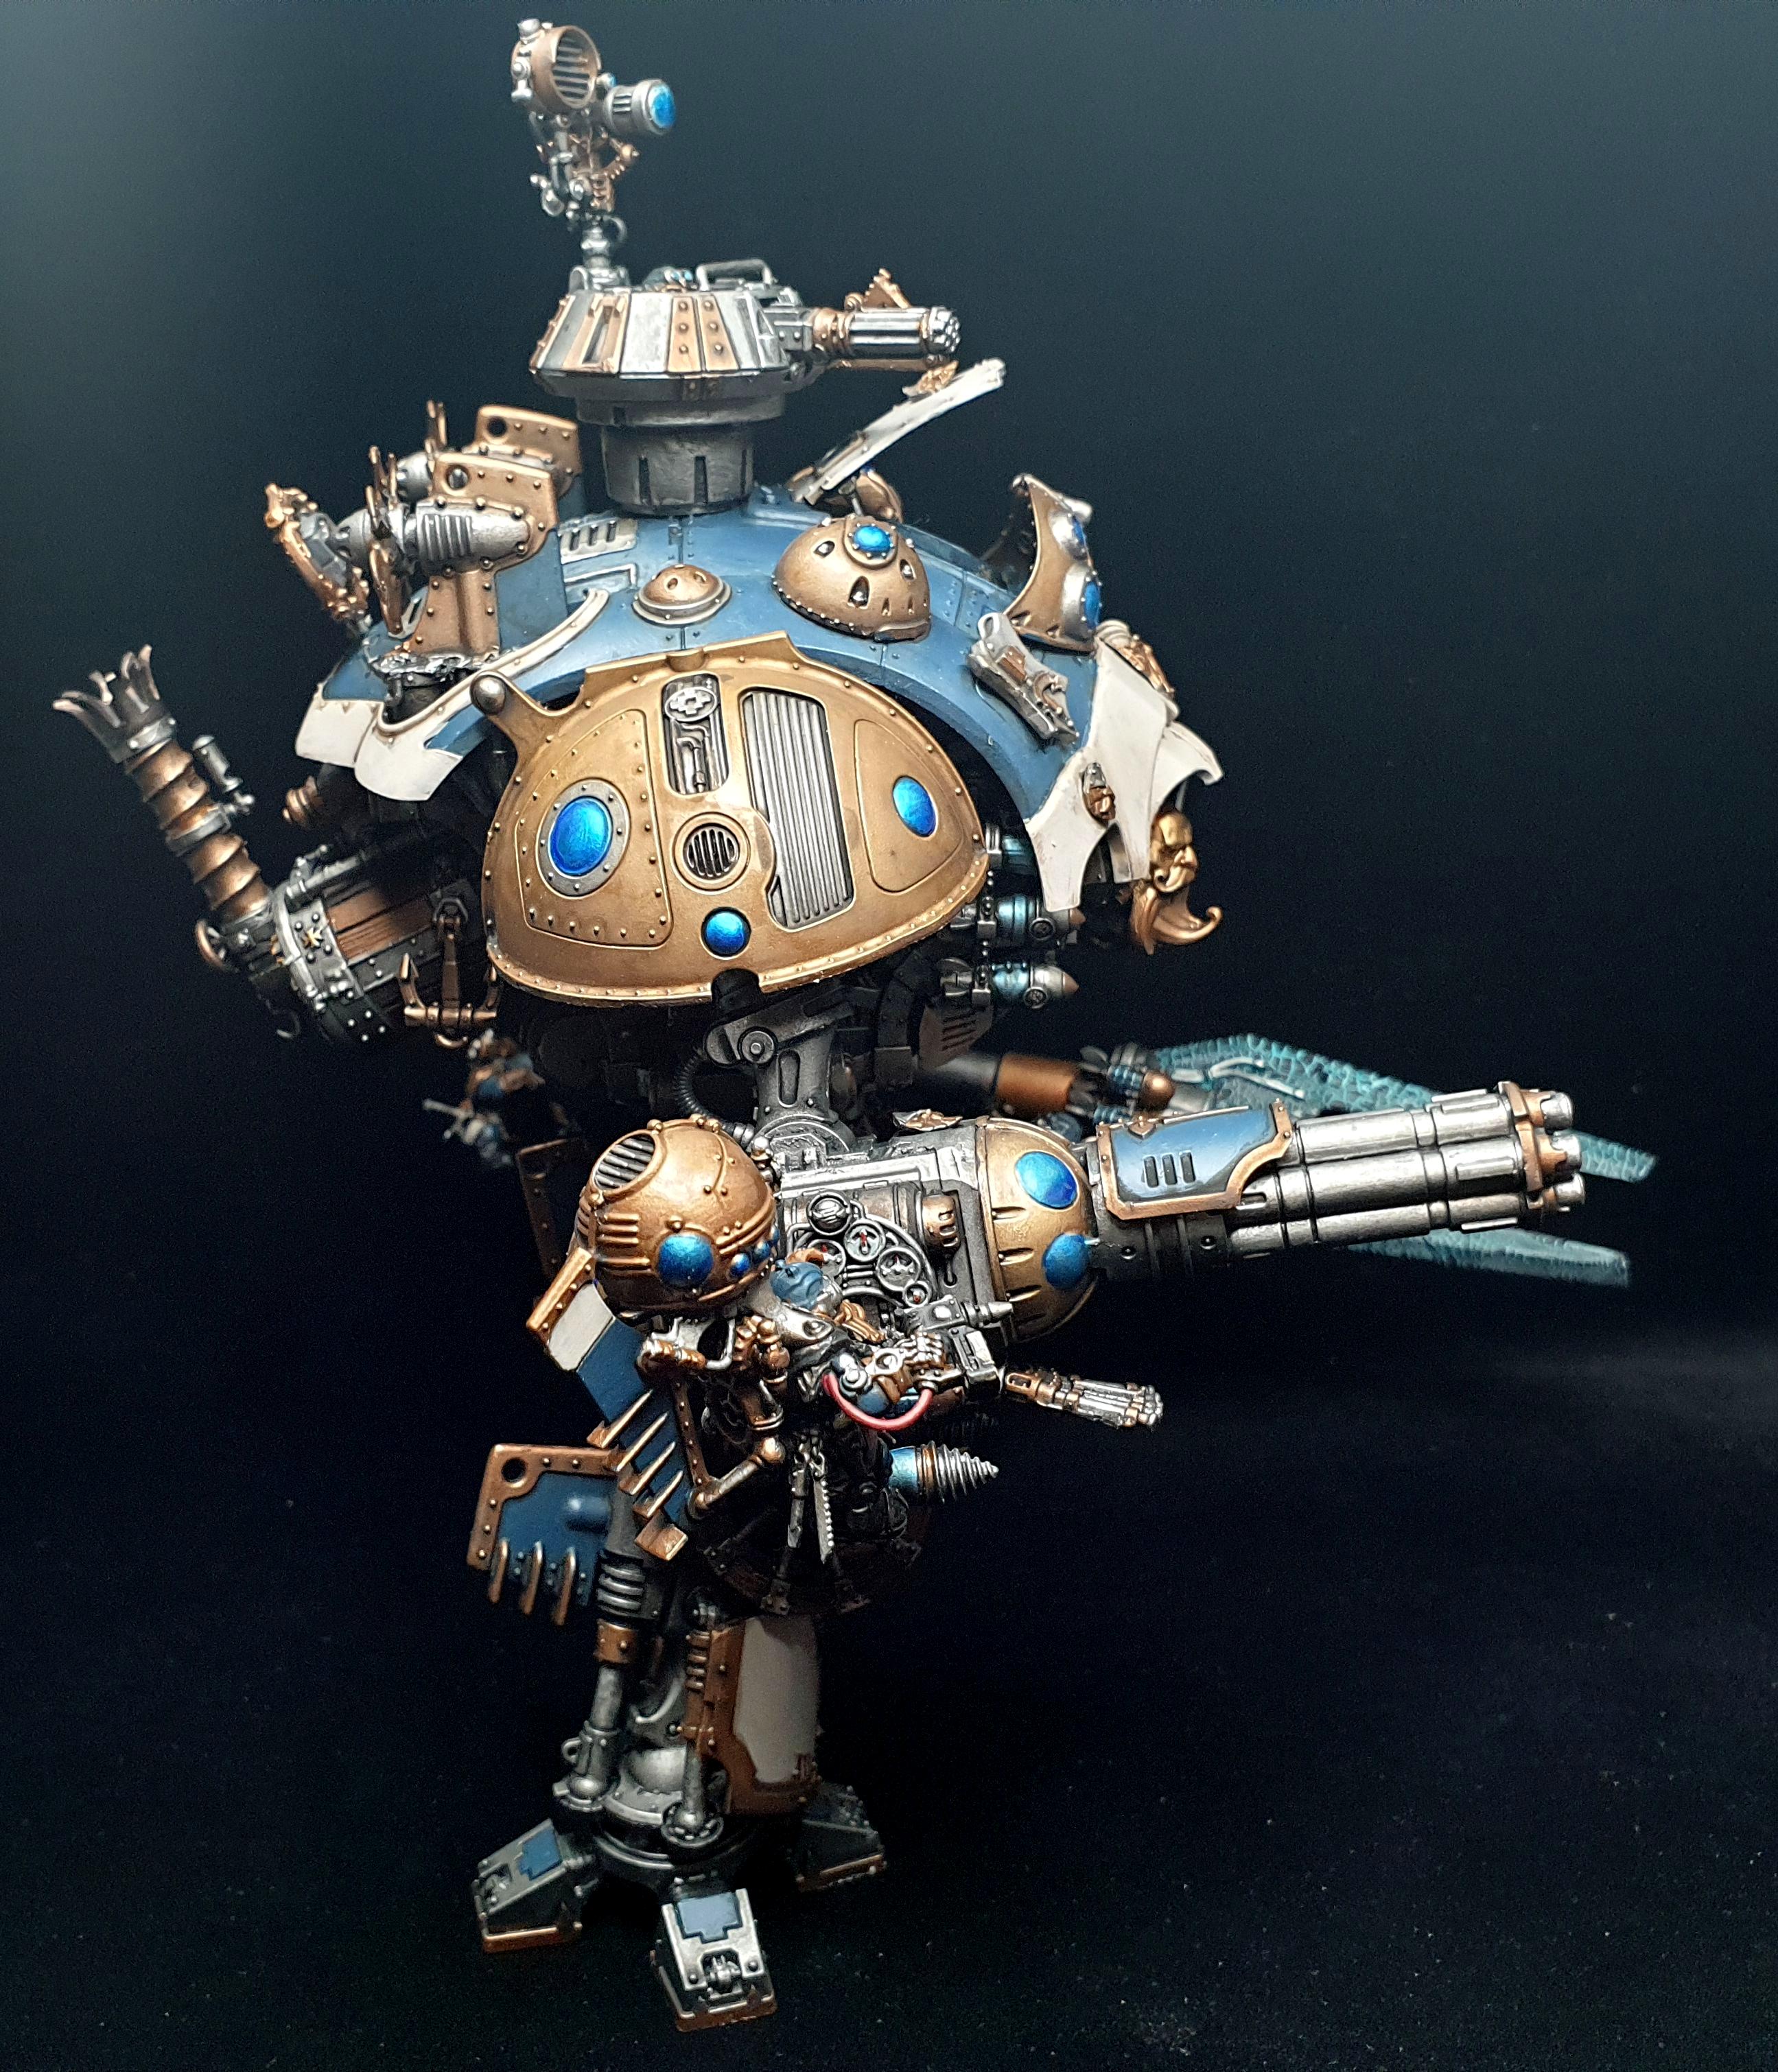 Age Of Sigmar, Cities Of Sigmar, Imperial Knight, Kharadron Overlords, Warhammer Fantasy